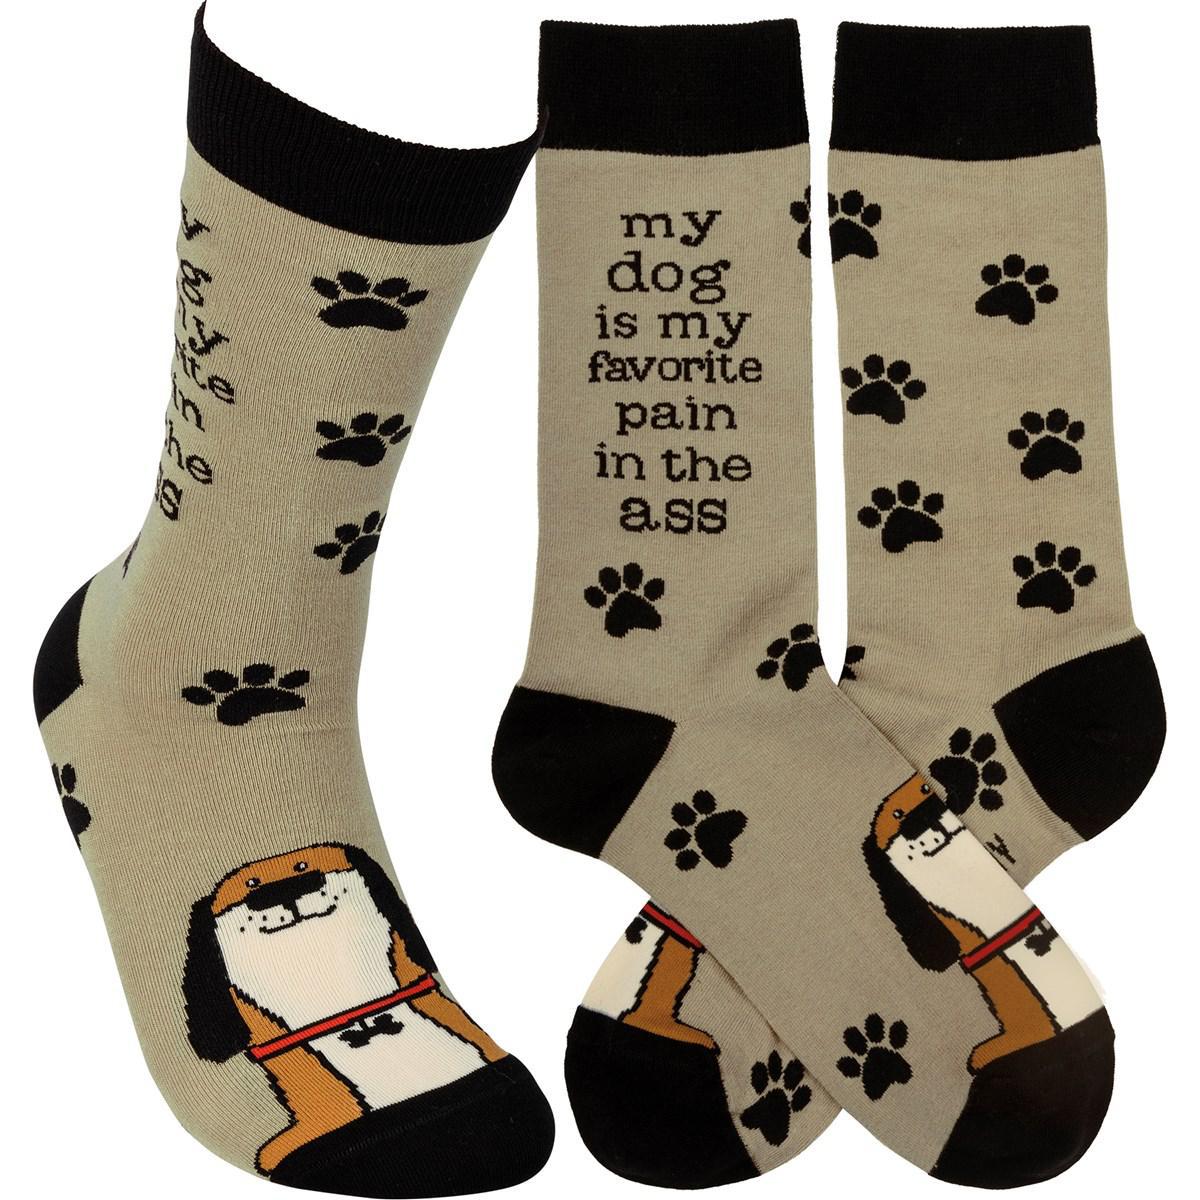 My Dog Is My Favorite Pain In The Ass Socks